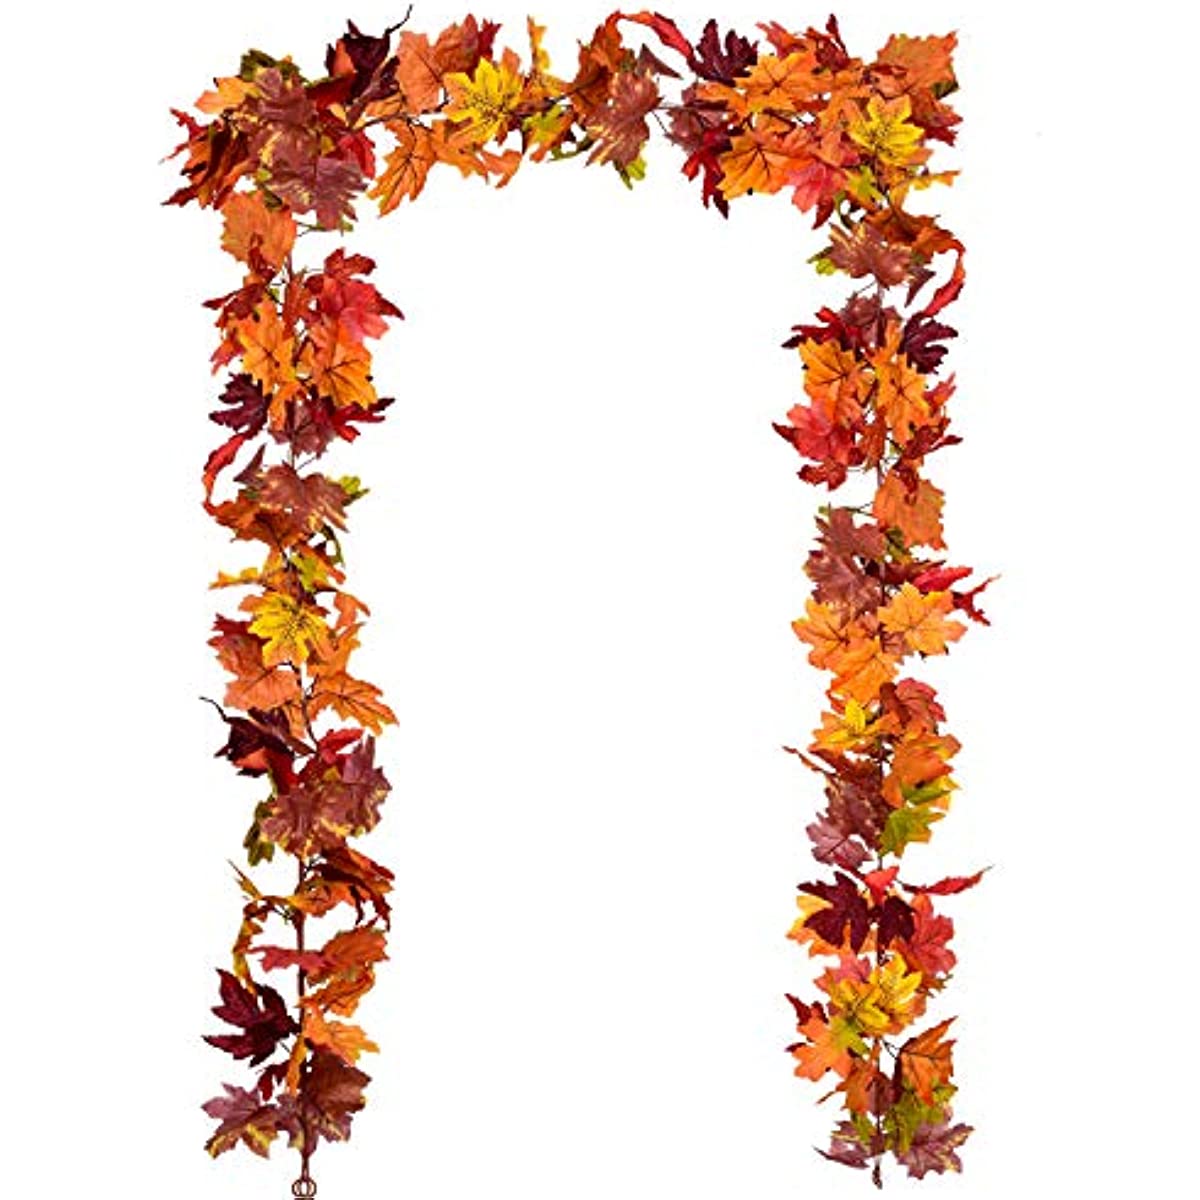 

1 Pack Fall Garland Maple Leaf, Hanging Vine Garland Artificial Autumn Foliage Garland Thanksgiving Decor For Home Wedding Fireplace Party Christmas Supplies